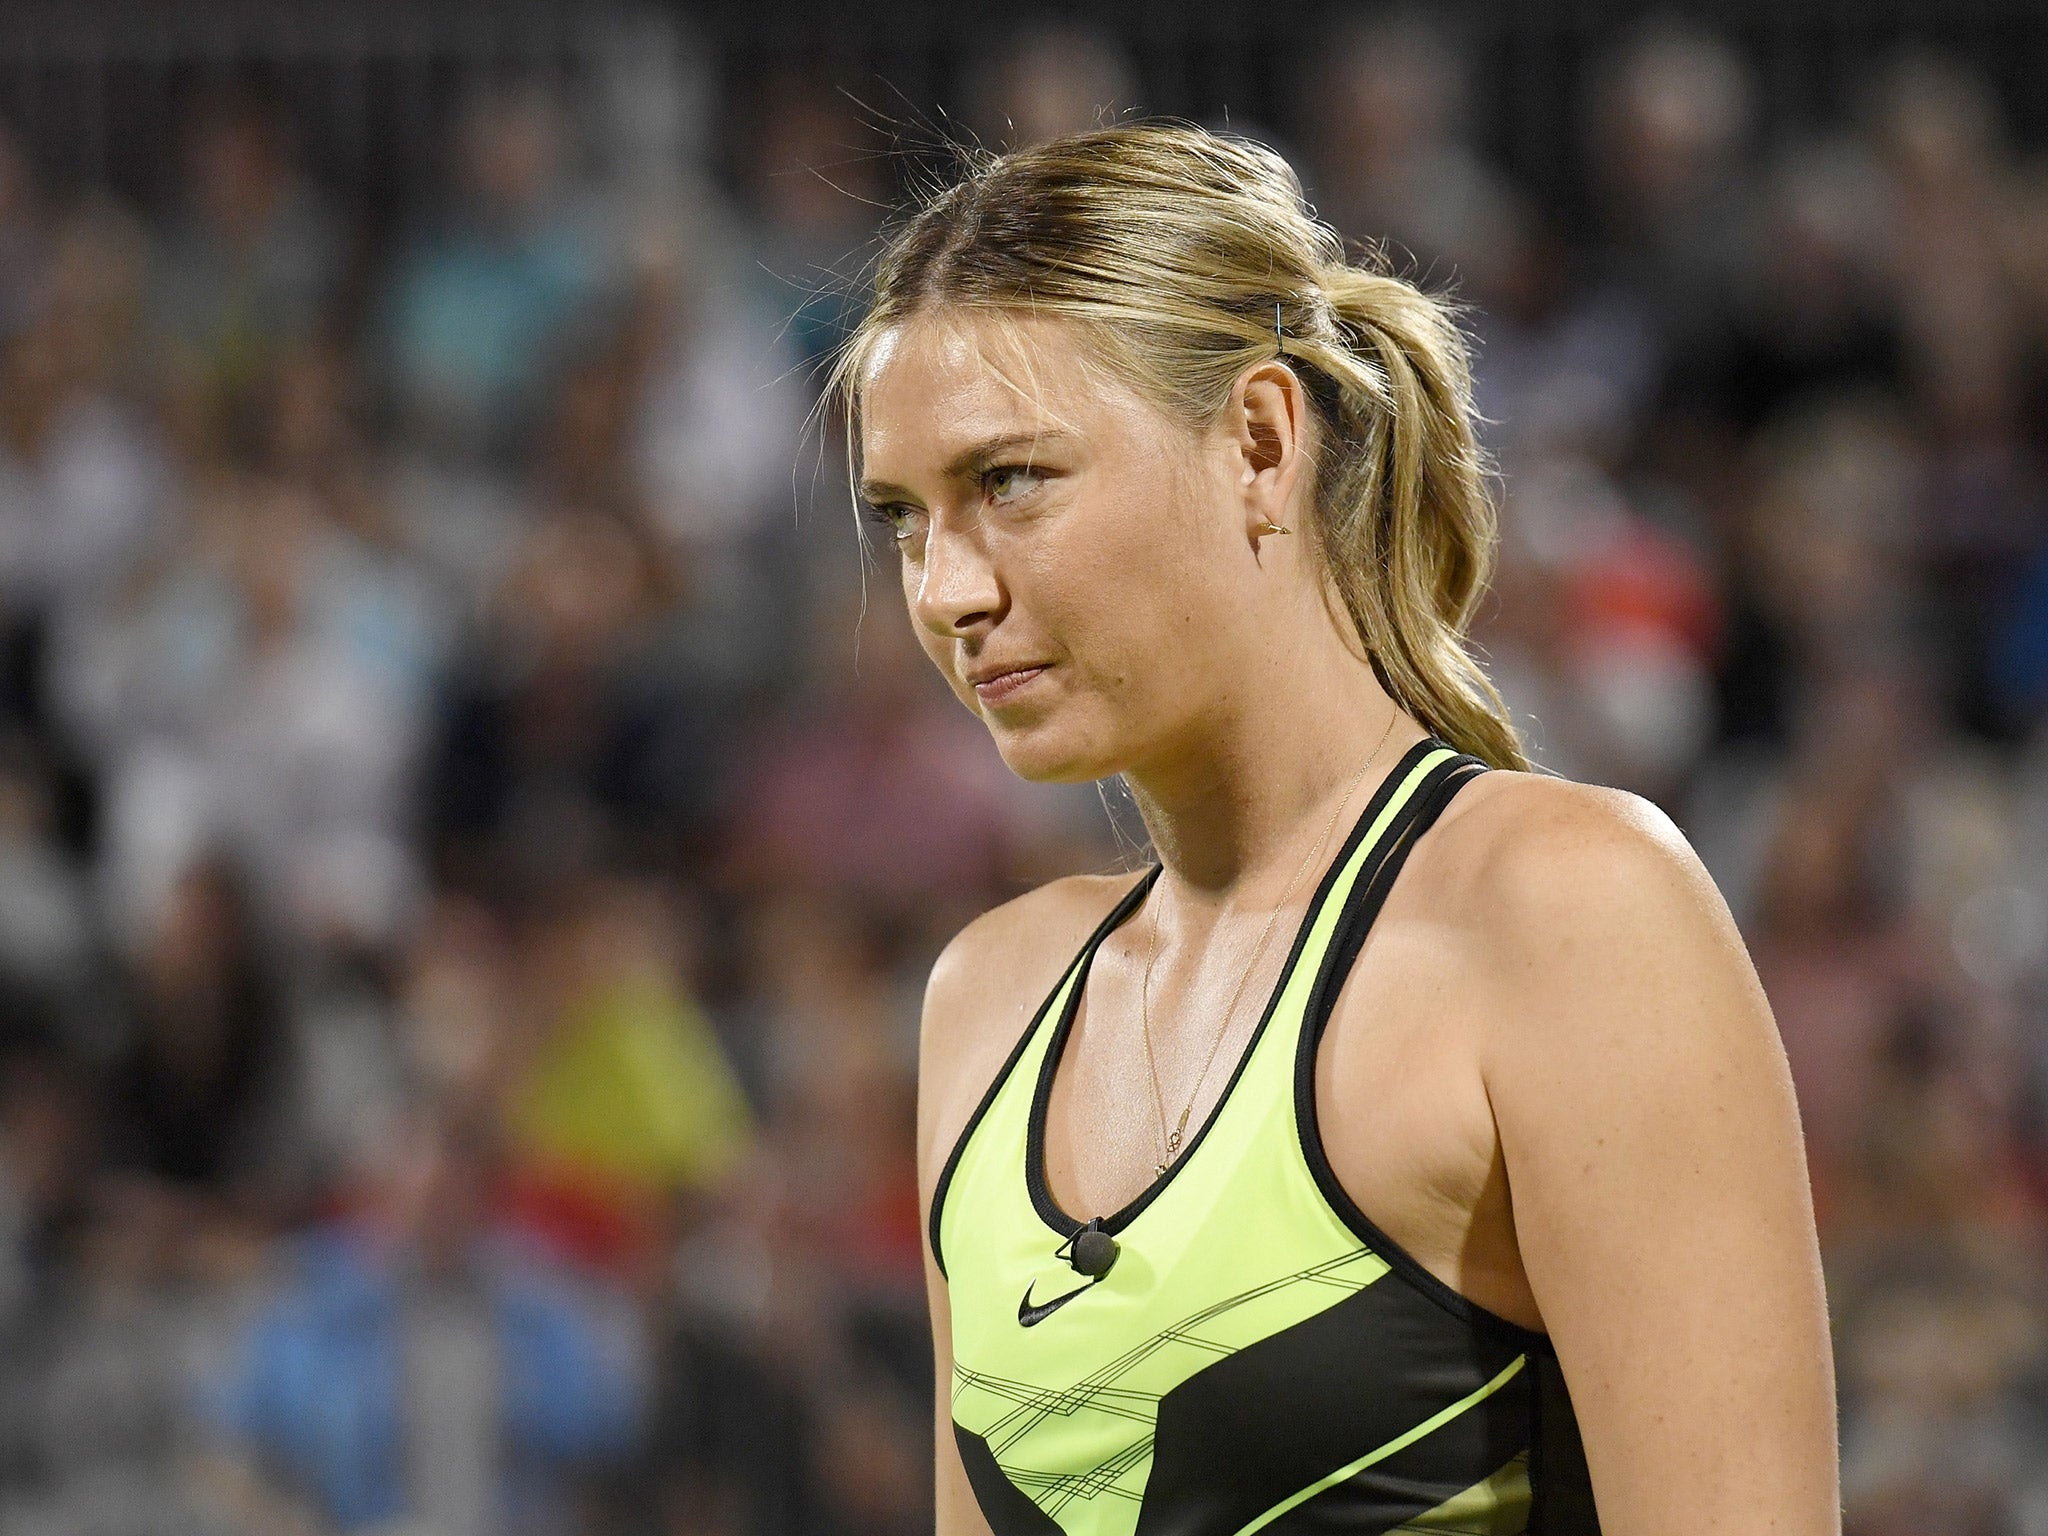 Maria Sharapova will be allowed to return to tennis in April 2017